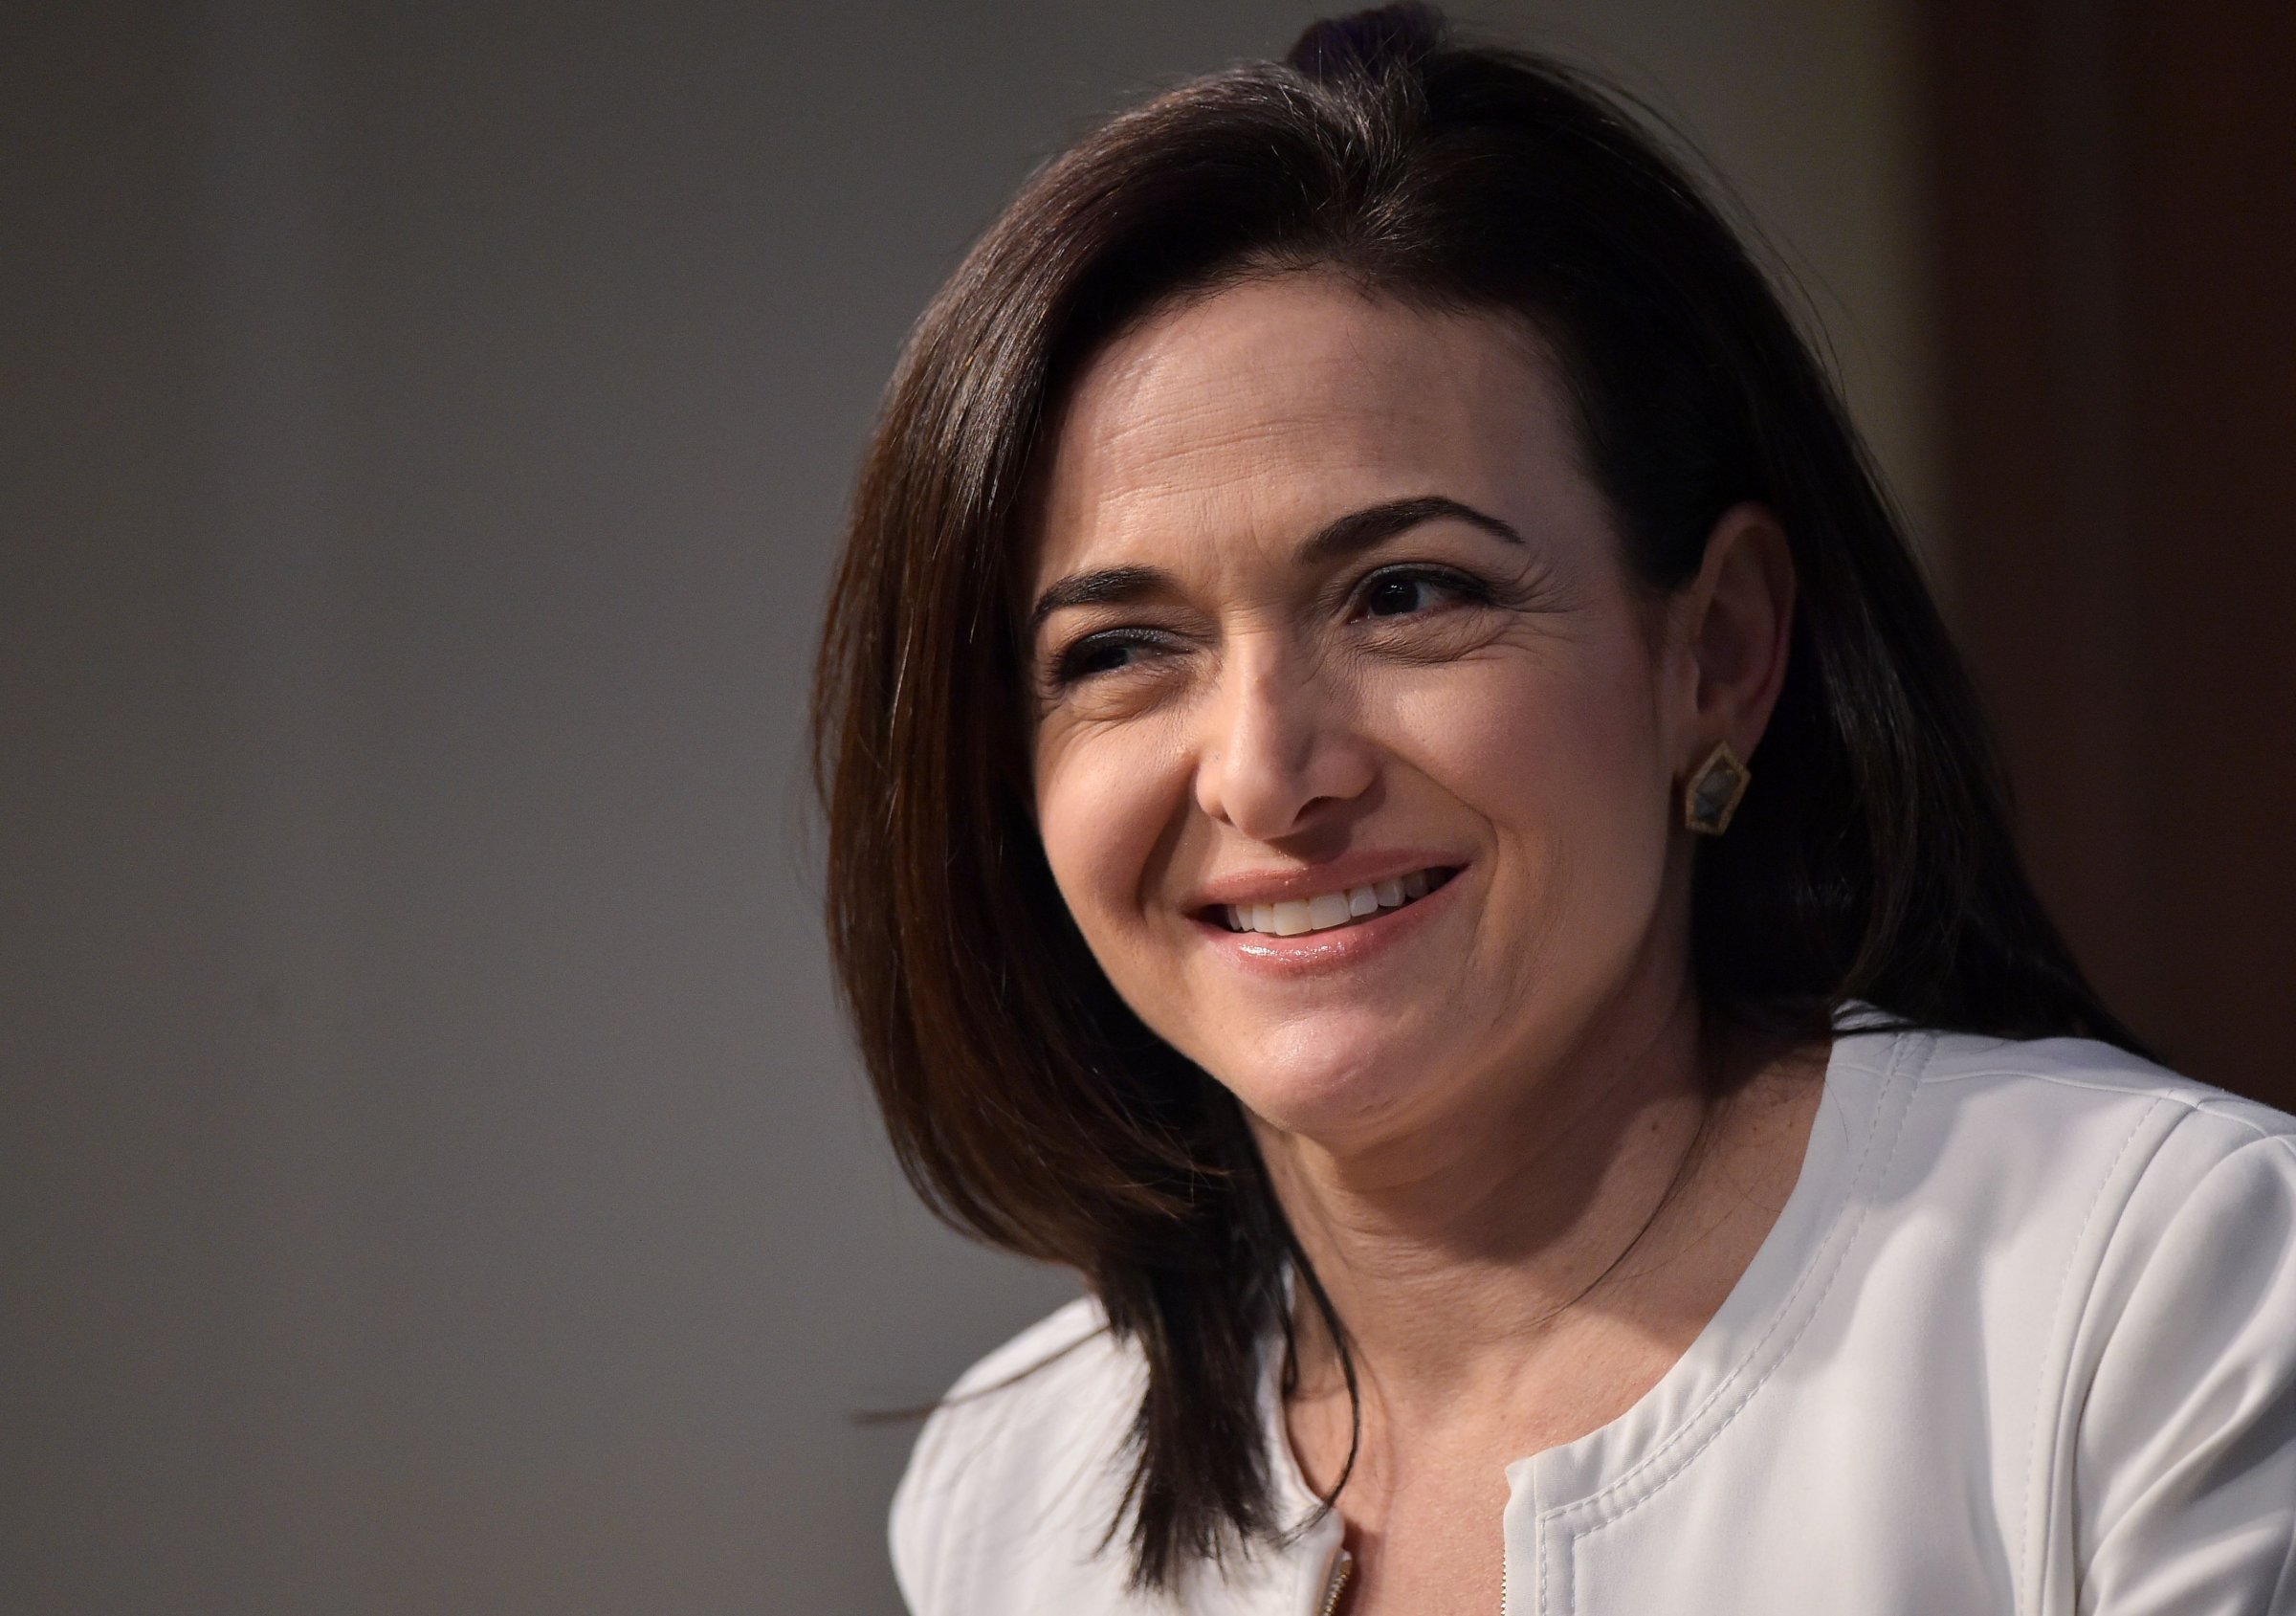 Facebook Chief Operating Officer Sheryl Sandberg speaks at the The American Enterprise Institute for Public Policy Research on June 22, 2016 in Washington, DC.